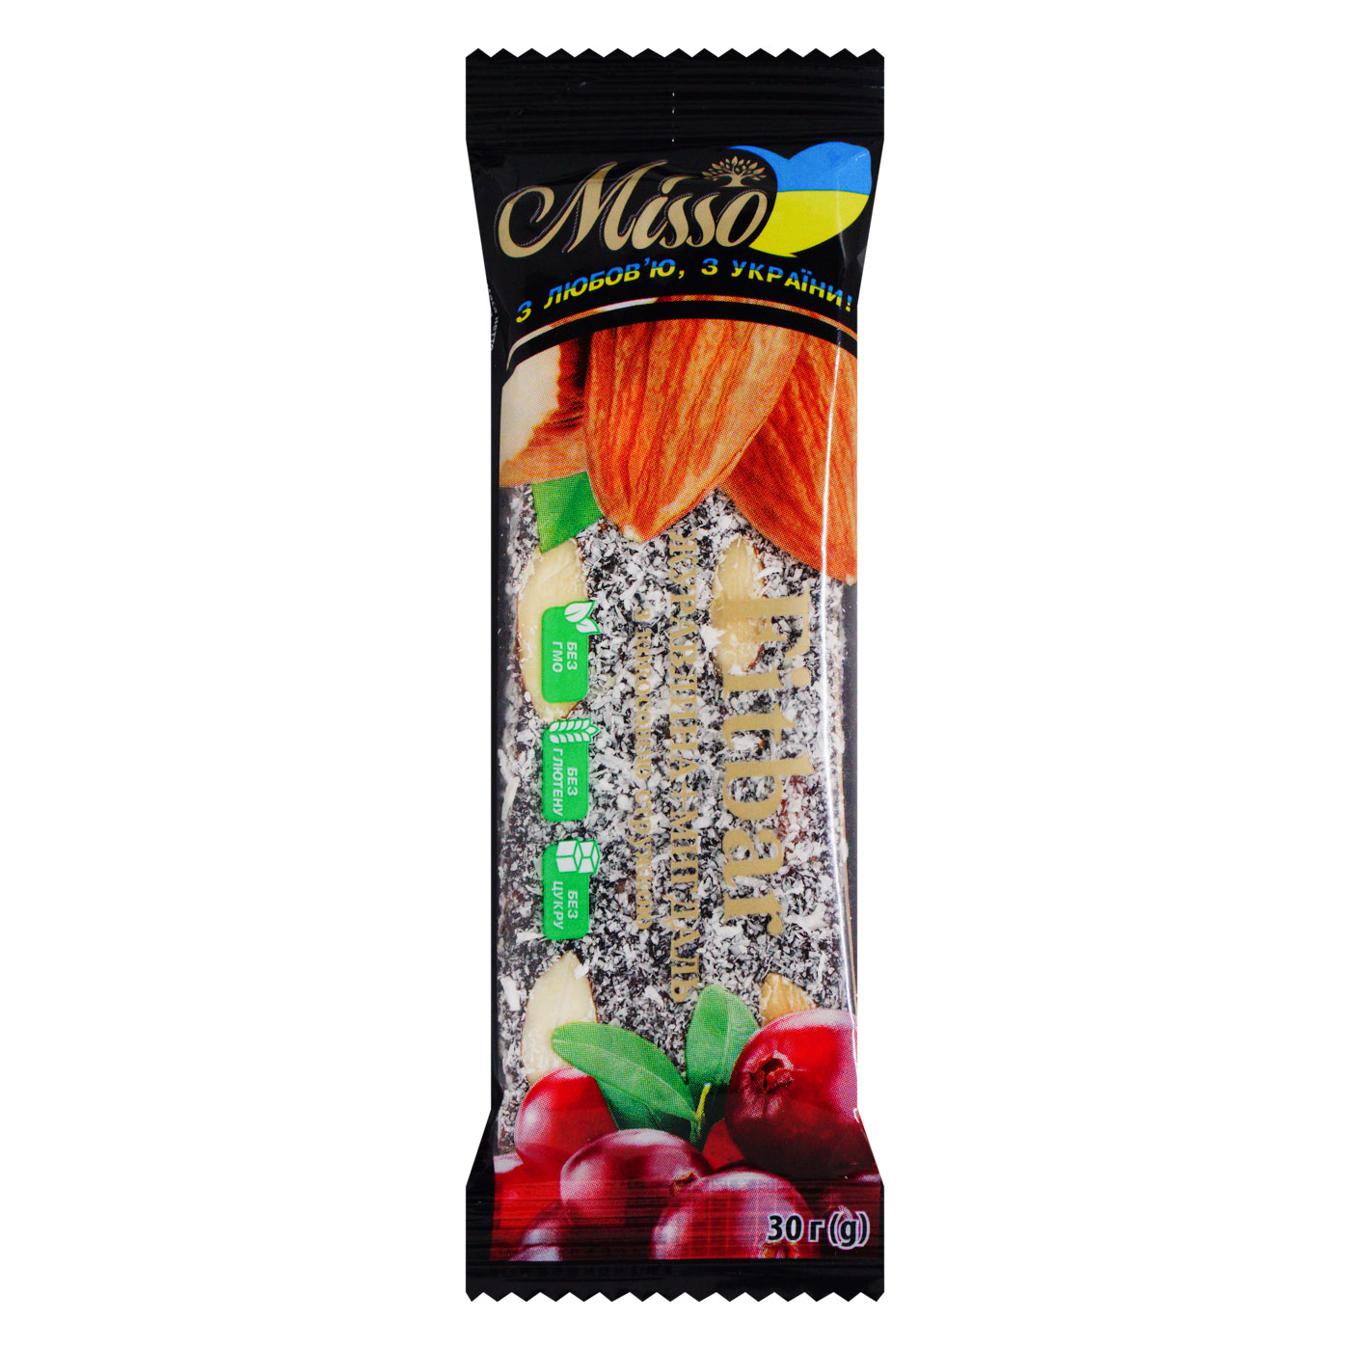 Bar Misso fitbar mixture of pressed dried fruits cranberry+almond 30g